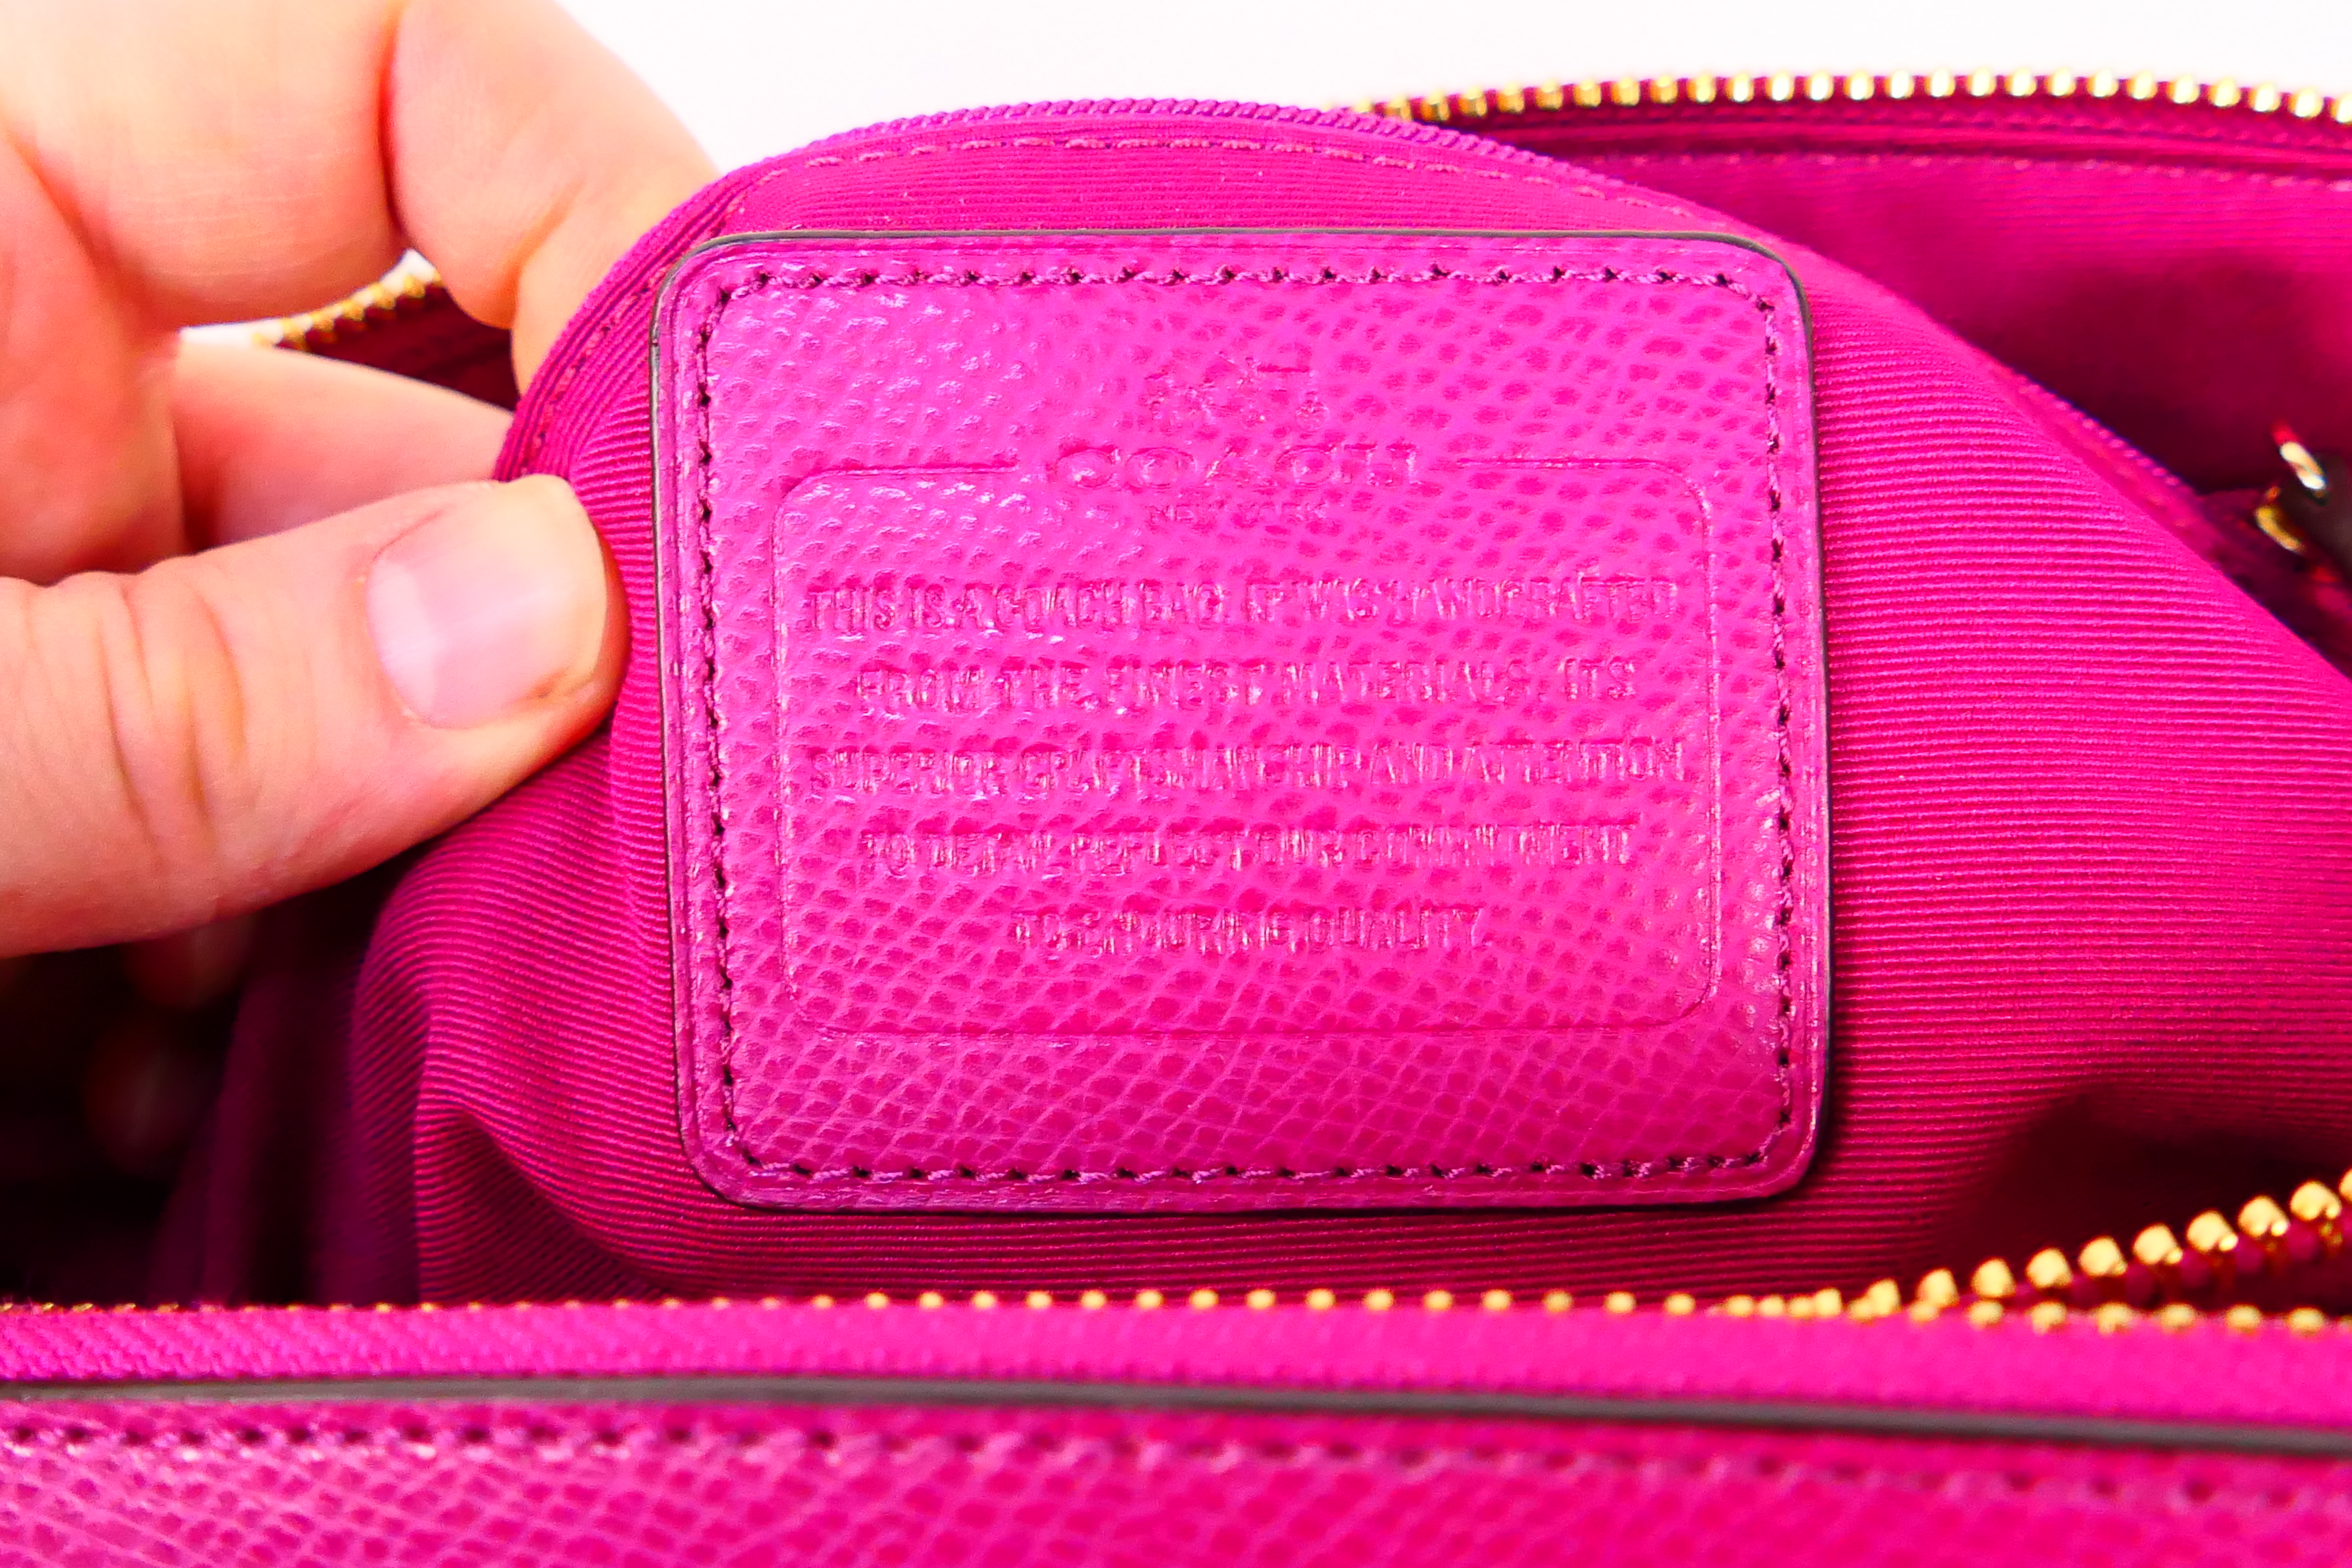 Coach New York - a Cerise Pink Coach handbag, labelled with makers mark, - Image 10 of 10